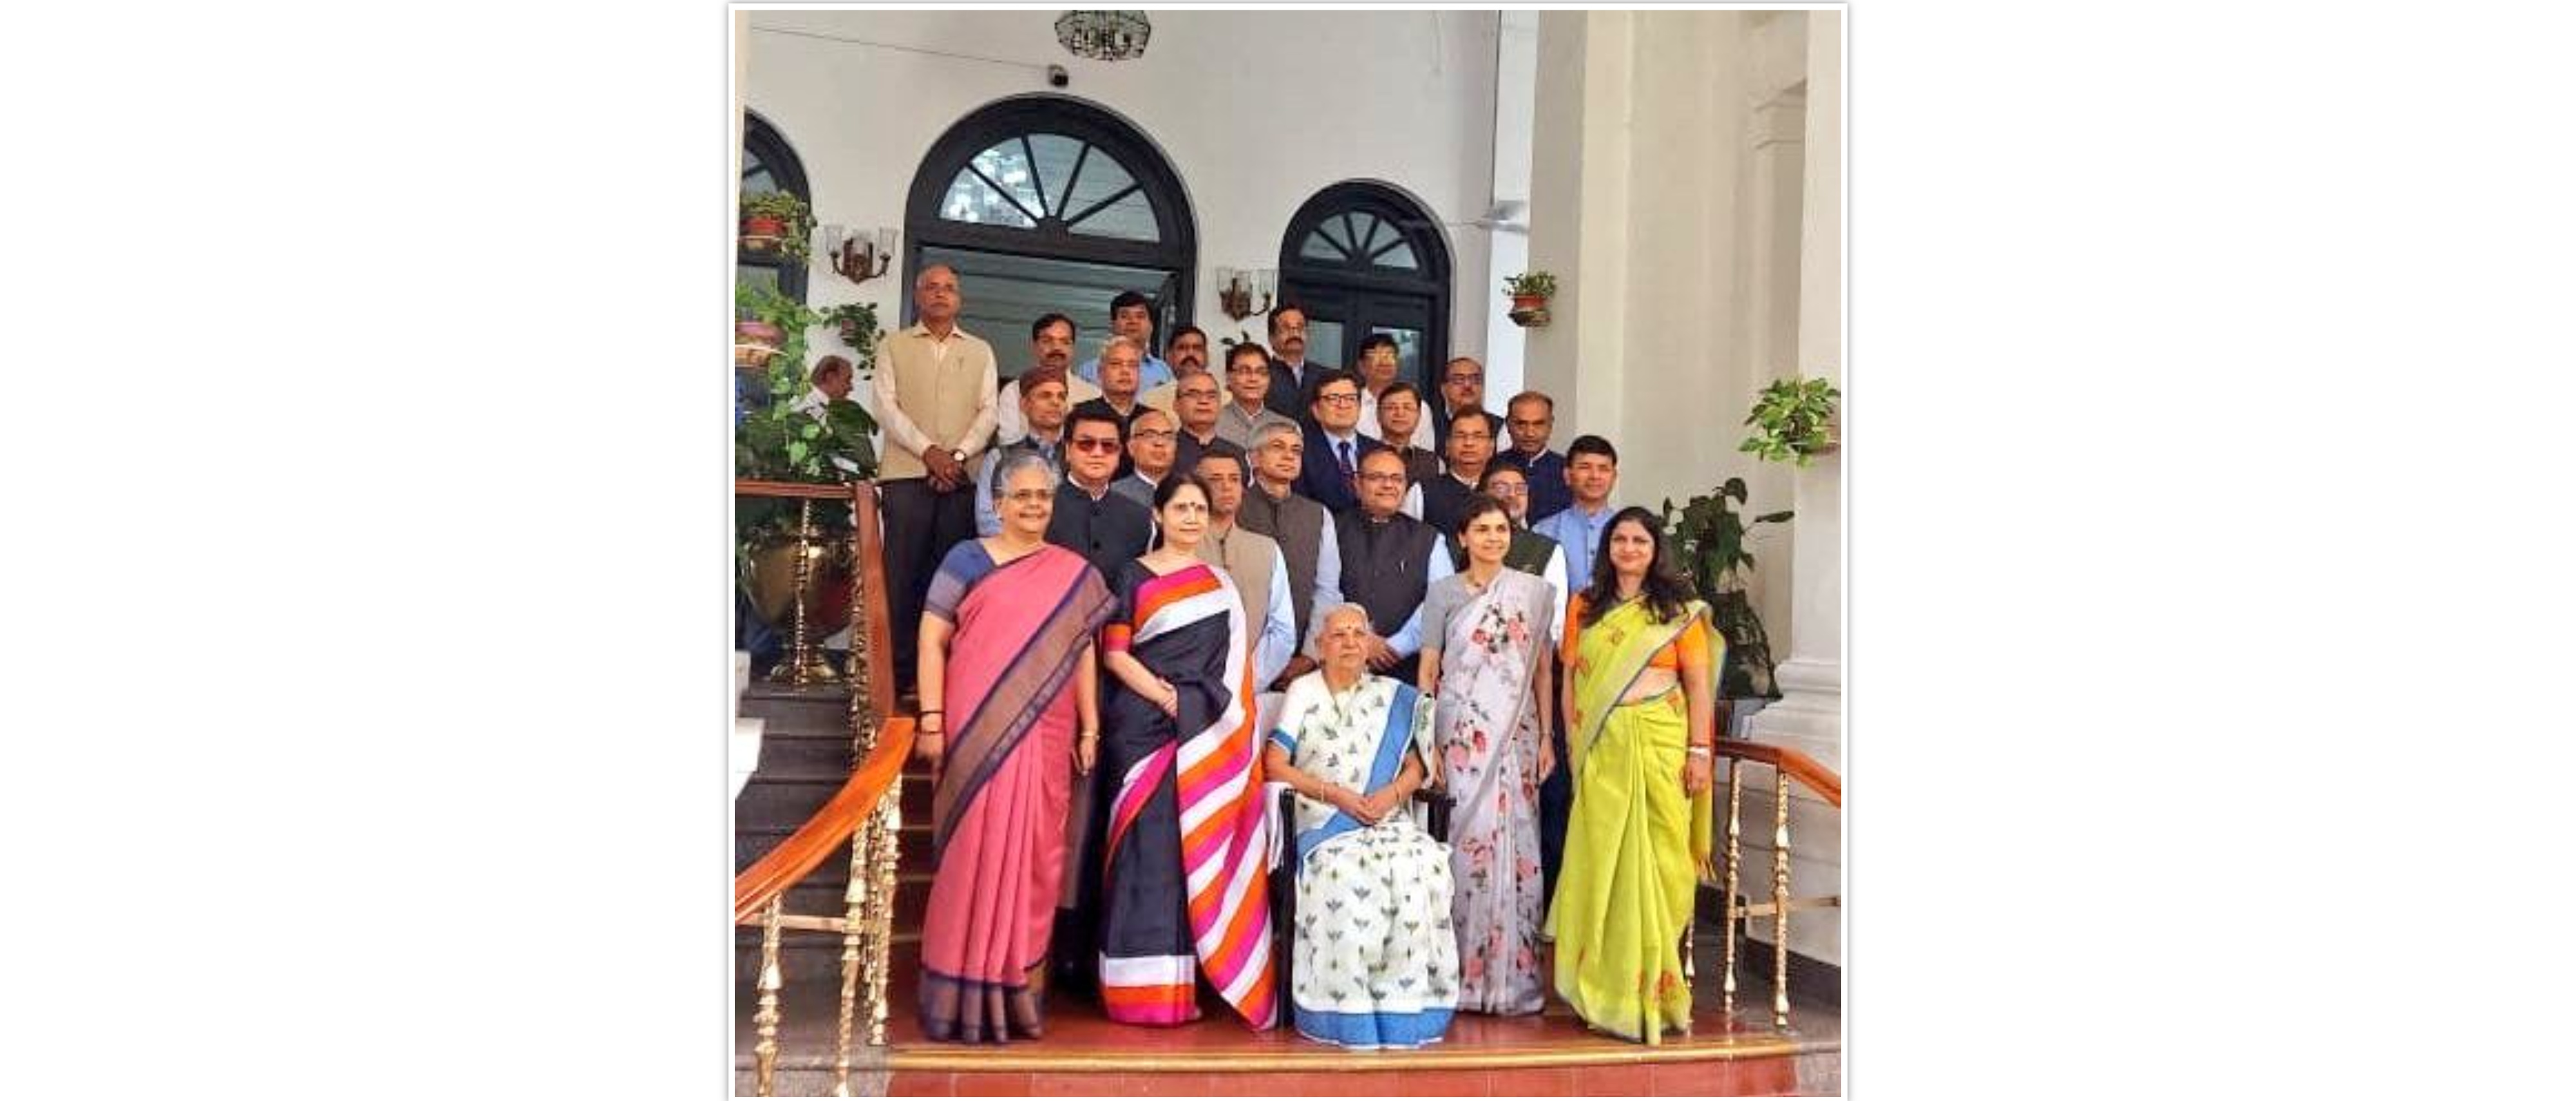  <div style="fcolor: #fff; font-weight: 600; font-size: 1.5em;">
<p style="font-size: 13.8px;">Ambassador Pankaj Sharma, along with several Heads of Indian Missions abroad, met with the Hon’ble Governor of State of Uttar Pradesh Smt Anandiben Patel  at Raj Bhawan, Uttar Pradesh.
<br /><span style="text-align: center;">18 October 2022</span></p>
</div>